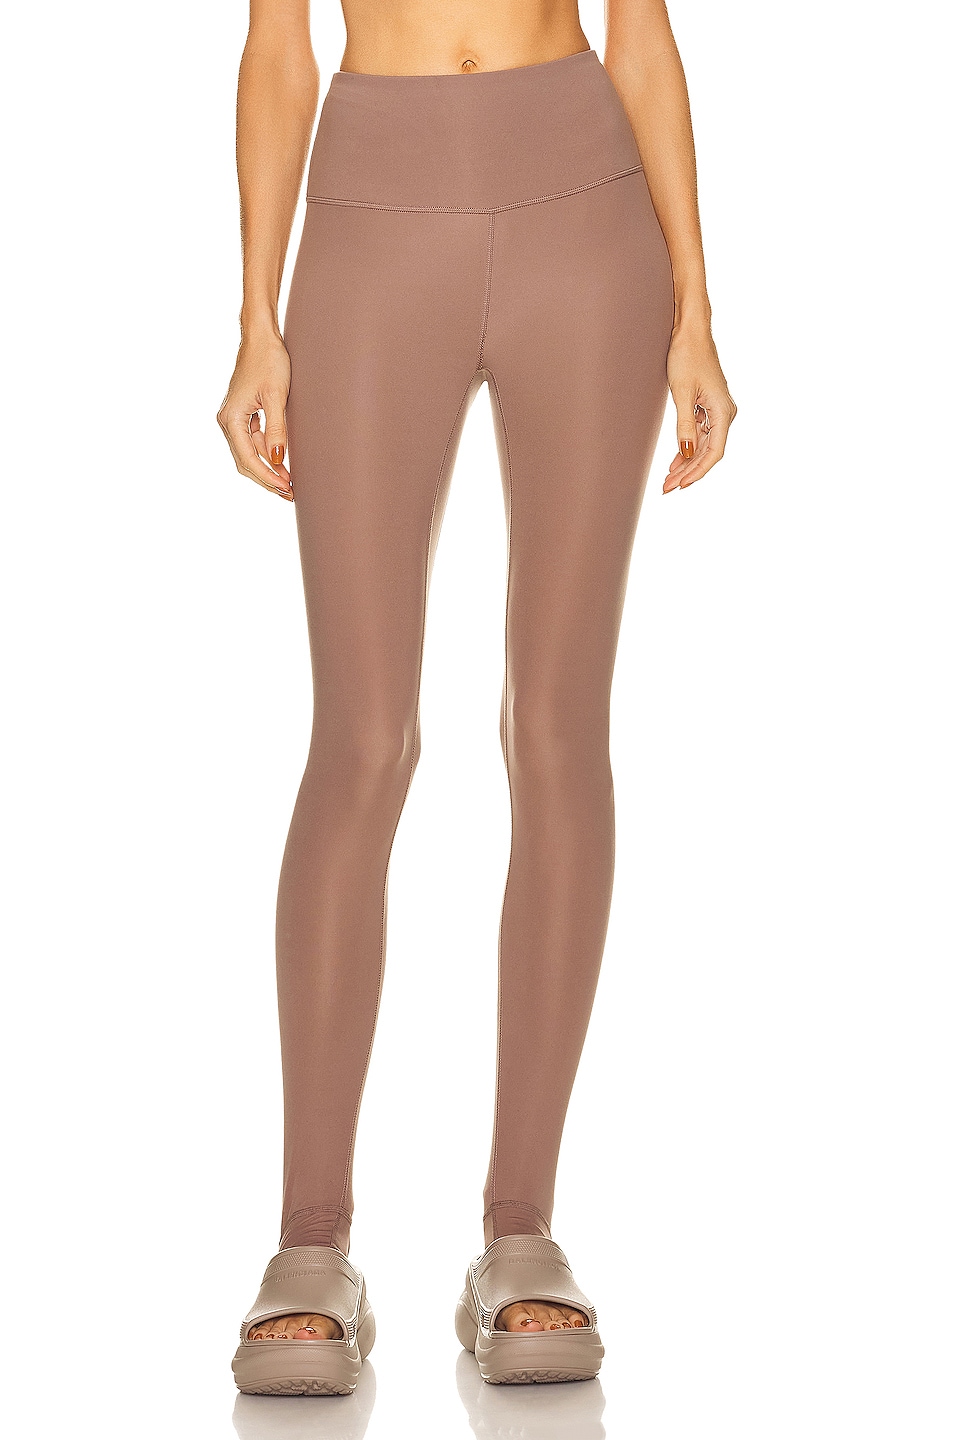 Image 1 of Varley Let's Move High Rise Stirrup Legging in Deep Taupe